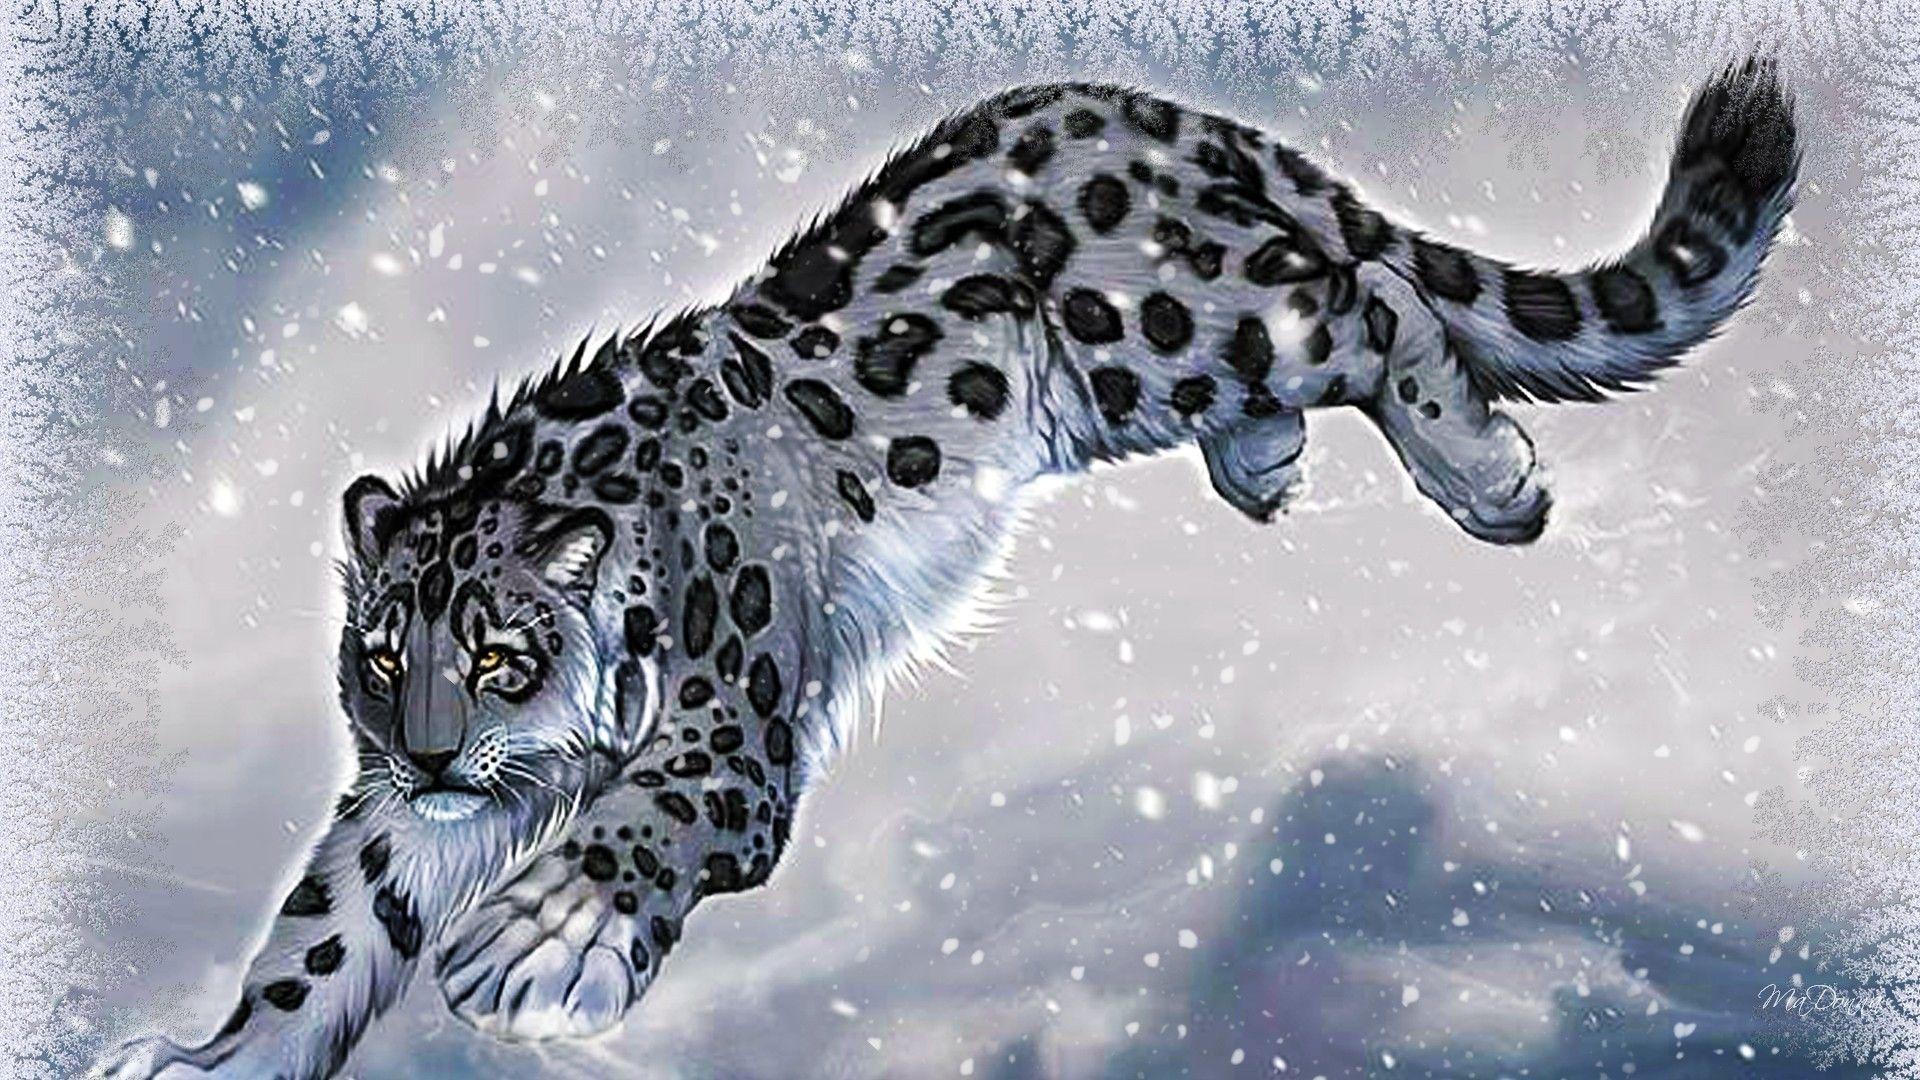 Amazing Animal Snow Leopard High Resolution Wallpaper For